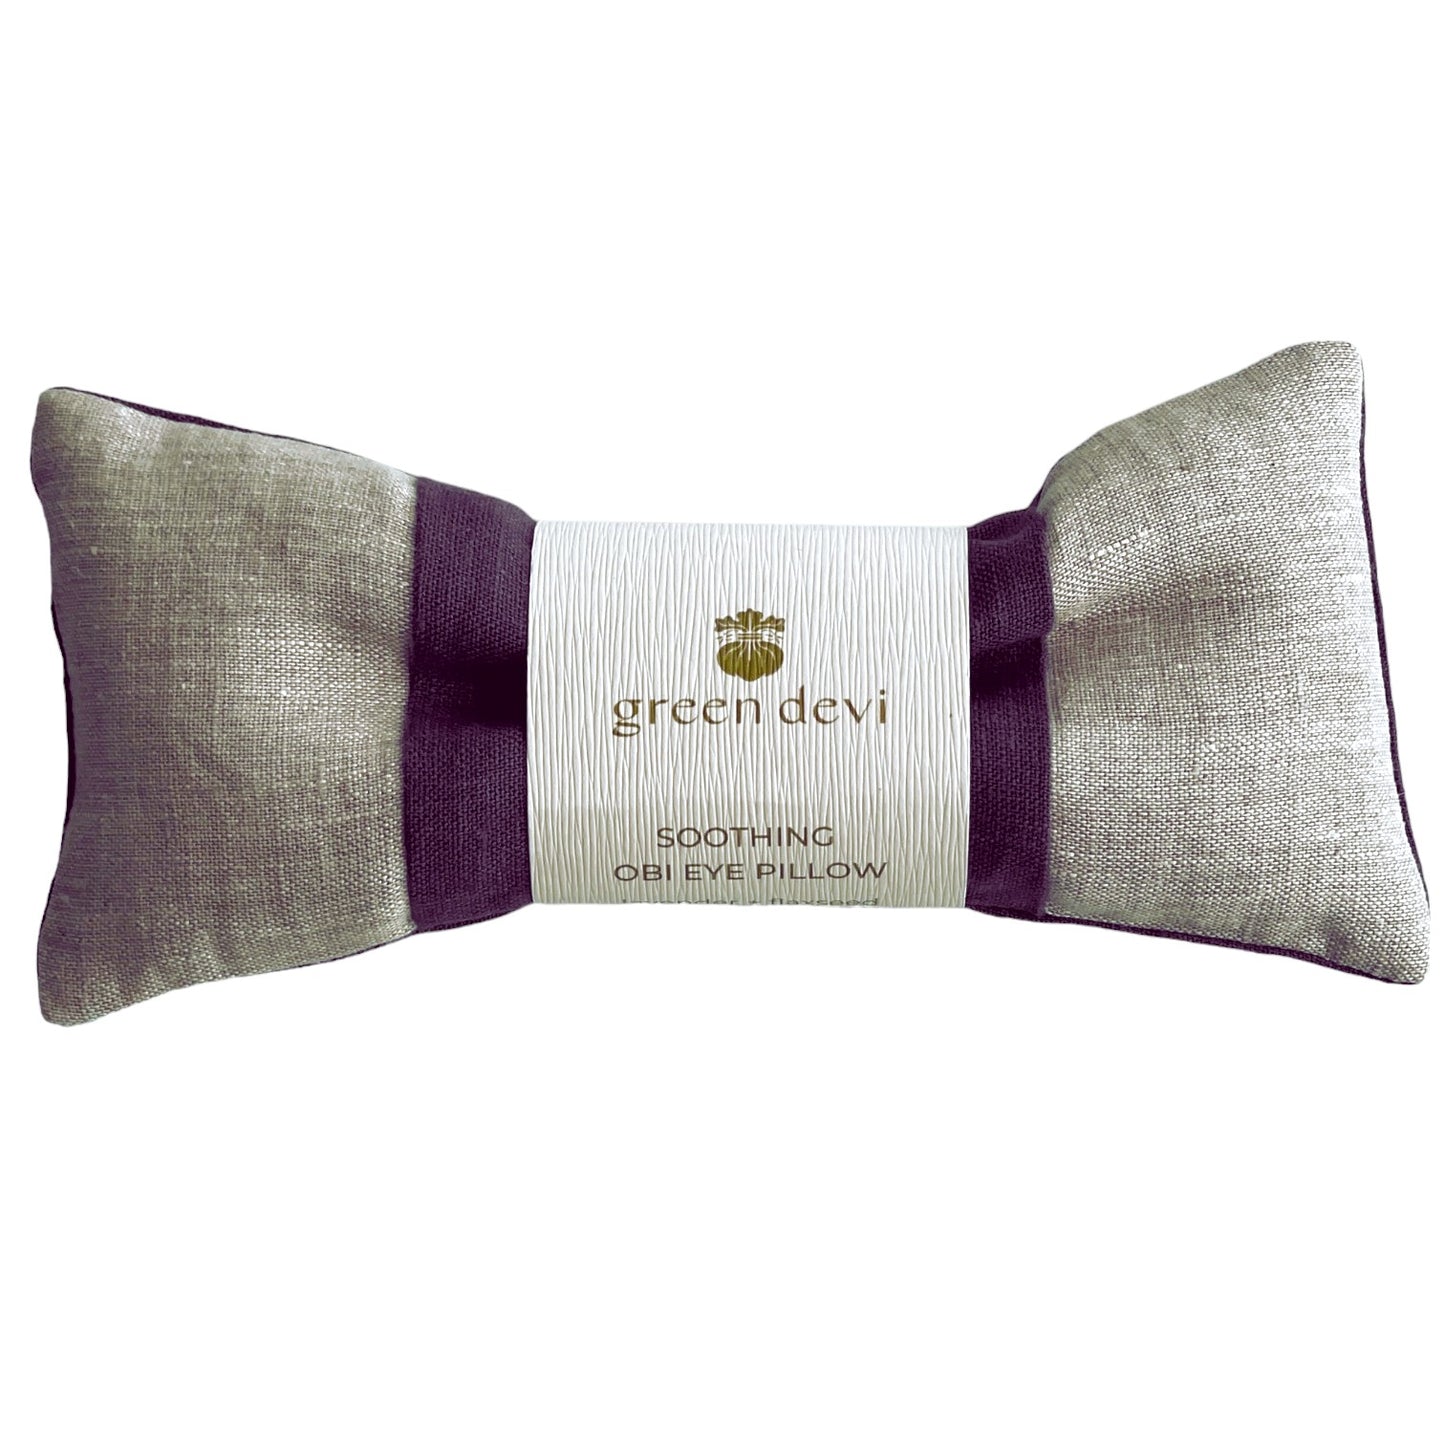 A linen and lavender eye pillow from Green Devi on a white background